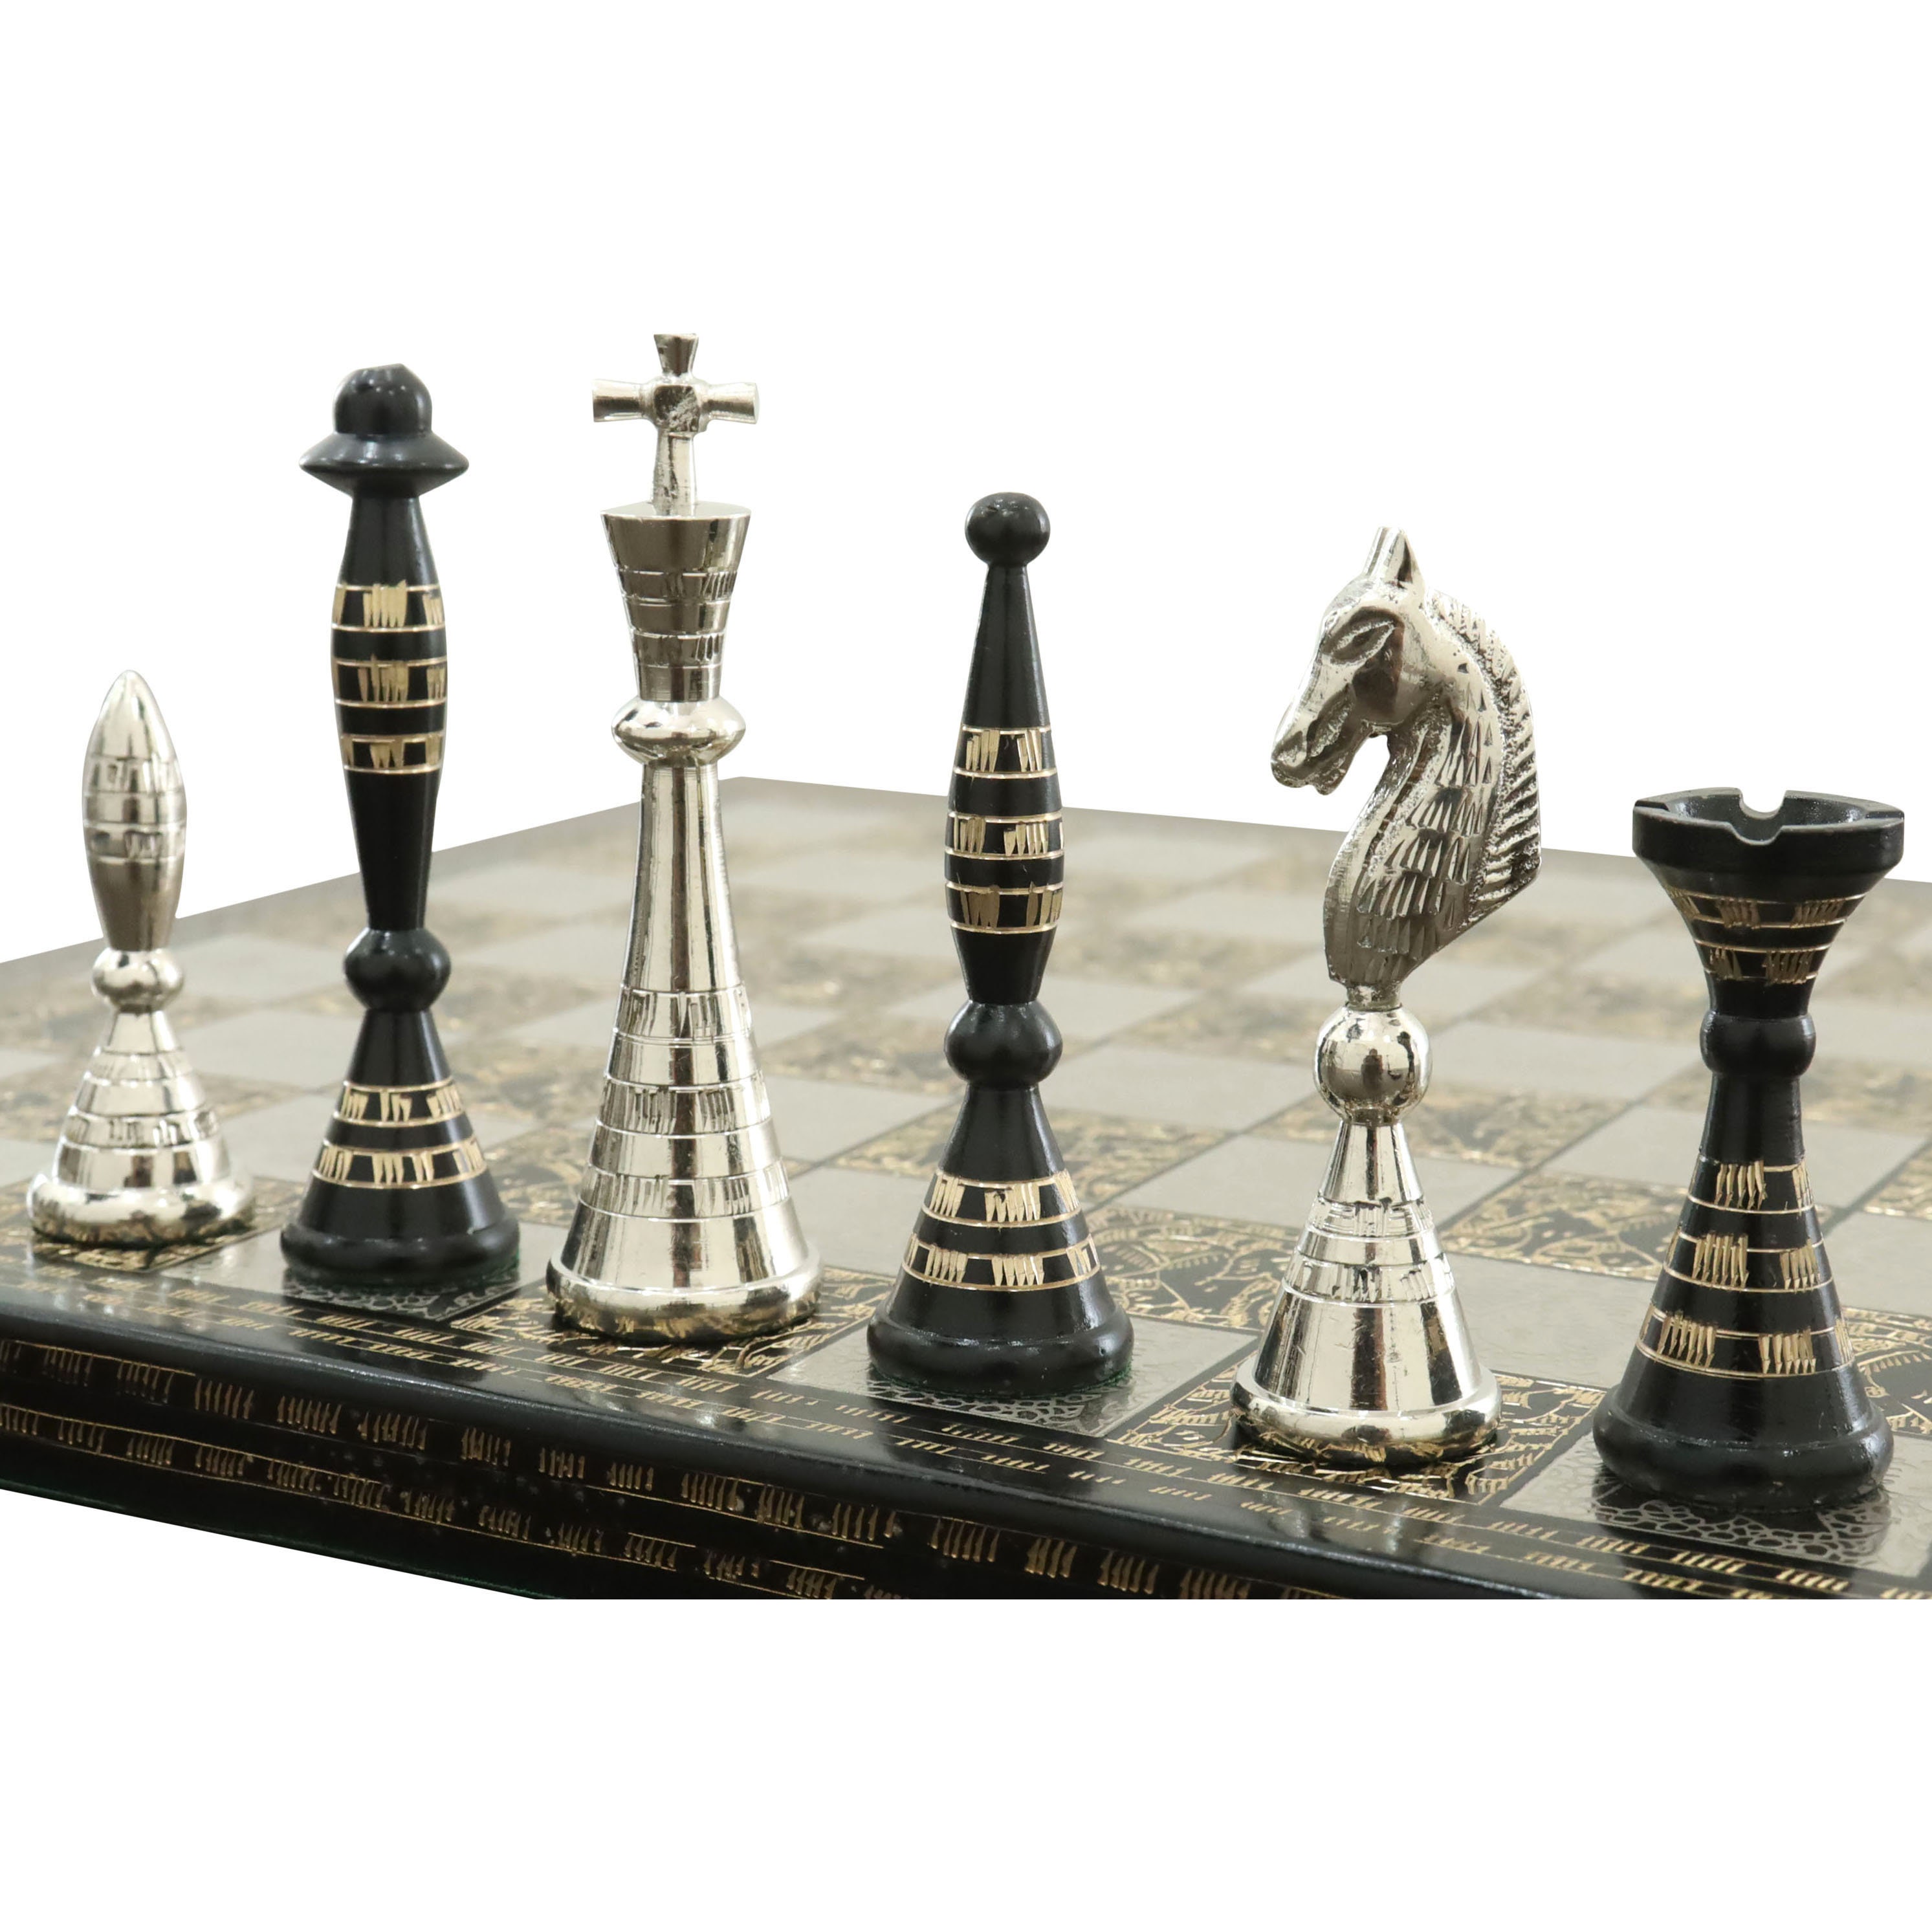 Super Slow Motion Chess Pieces Fall on the Chessboard. Filmed on a